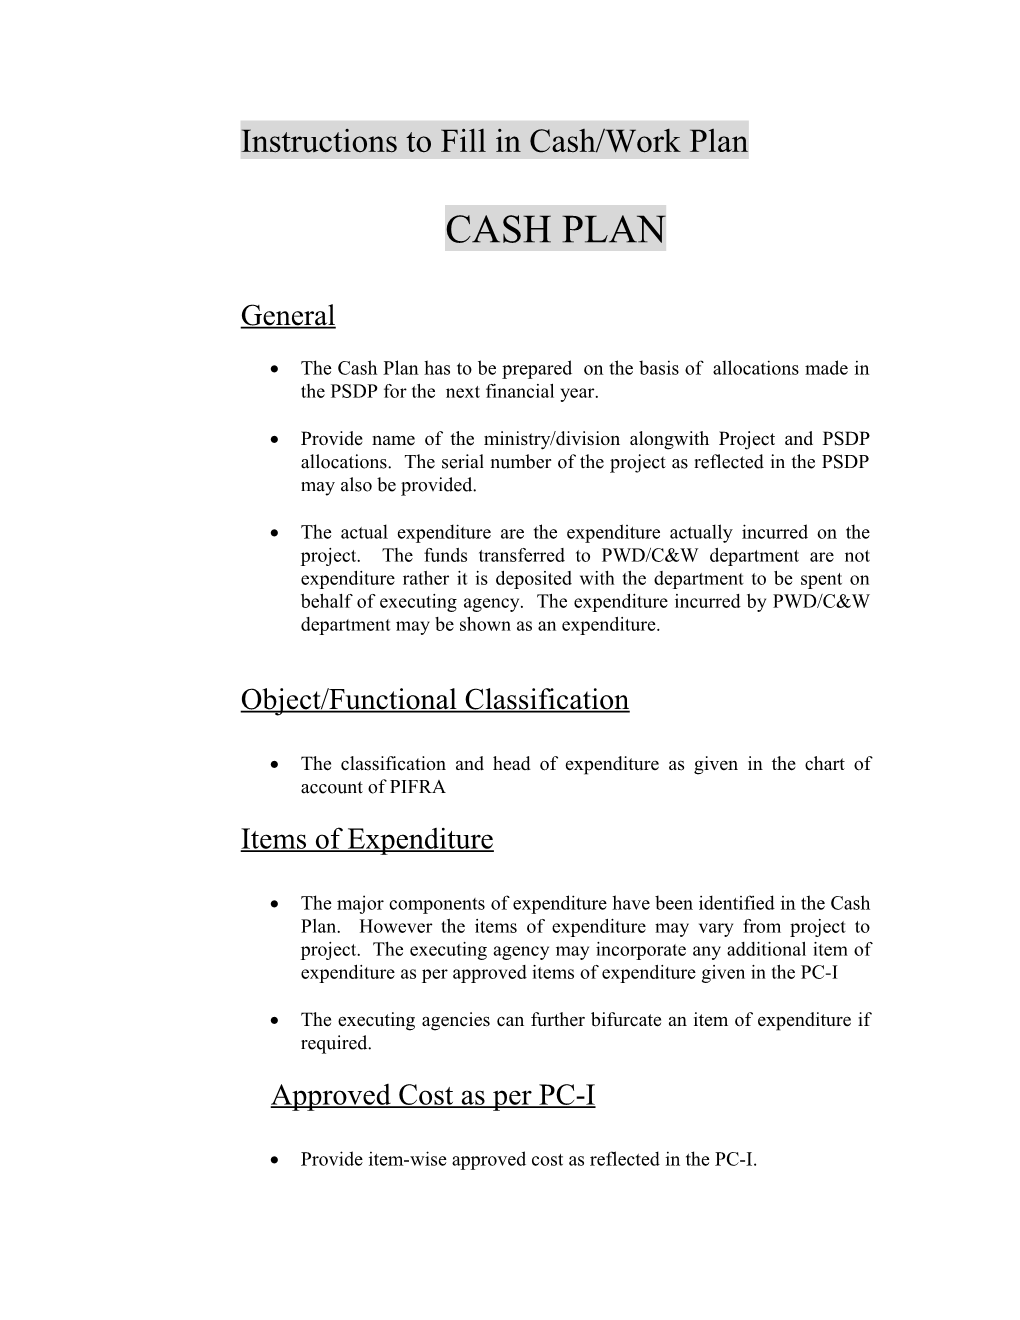 Instructions of Fill in Cash/Work Plan